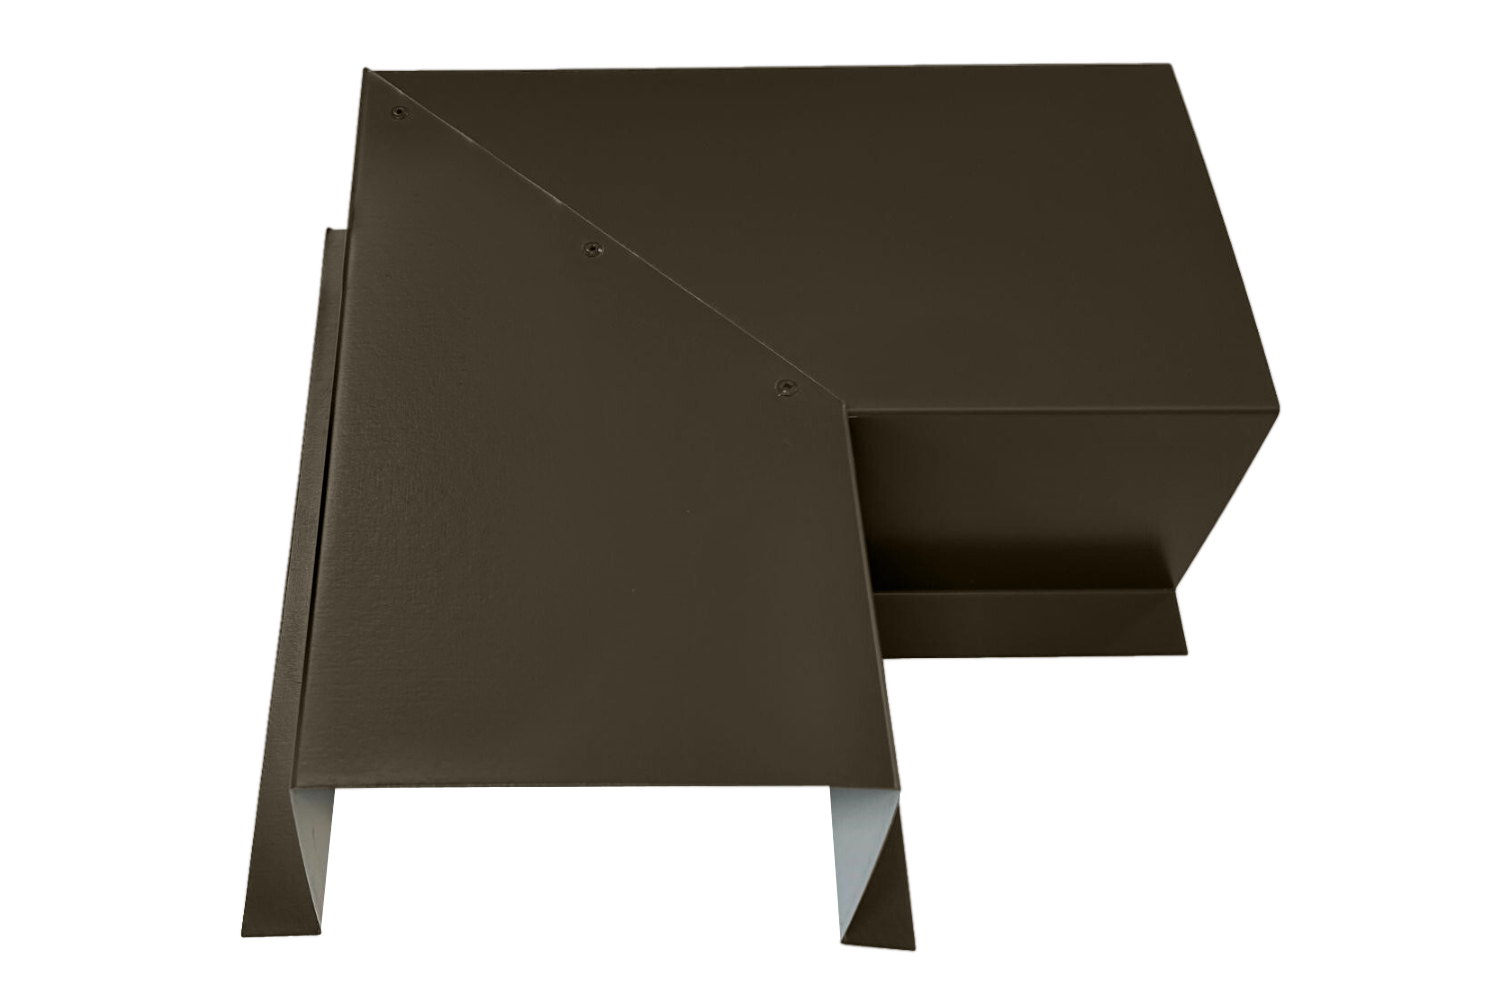 A three-dimensional, brown metal object with angular, geometric shapes, featuring a triangular section connected to a rectangular base. Made from premium quality 24 gauge steel, the object appears to be an abstract structural component or piece of modern art. This is the Perma Cover Commercial Series - 24 Gauge Line Set Cover Side Turning Elbows - Premium Quality.